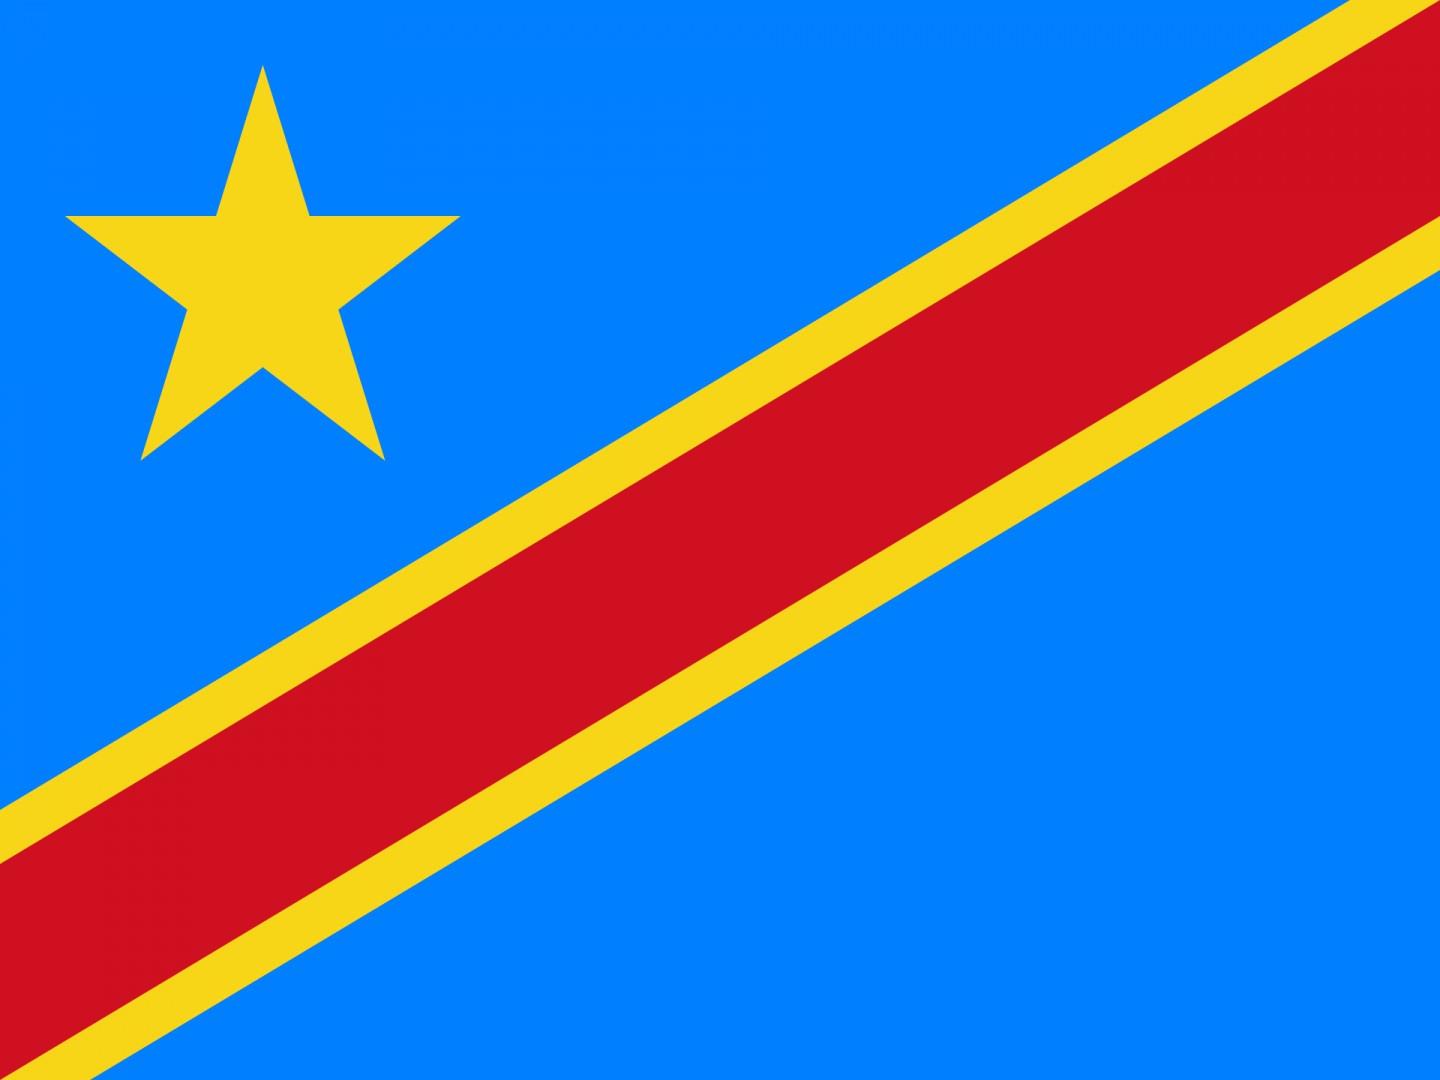 The DR Congo flag features a sky blue background, a yellow star in the upper left corner and a red stripe with a yellow trim running from the top right to bottom left.